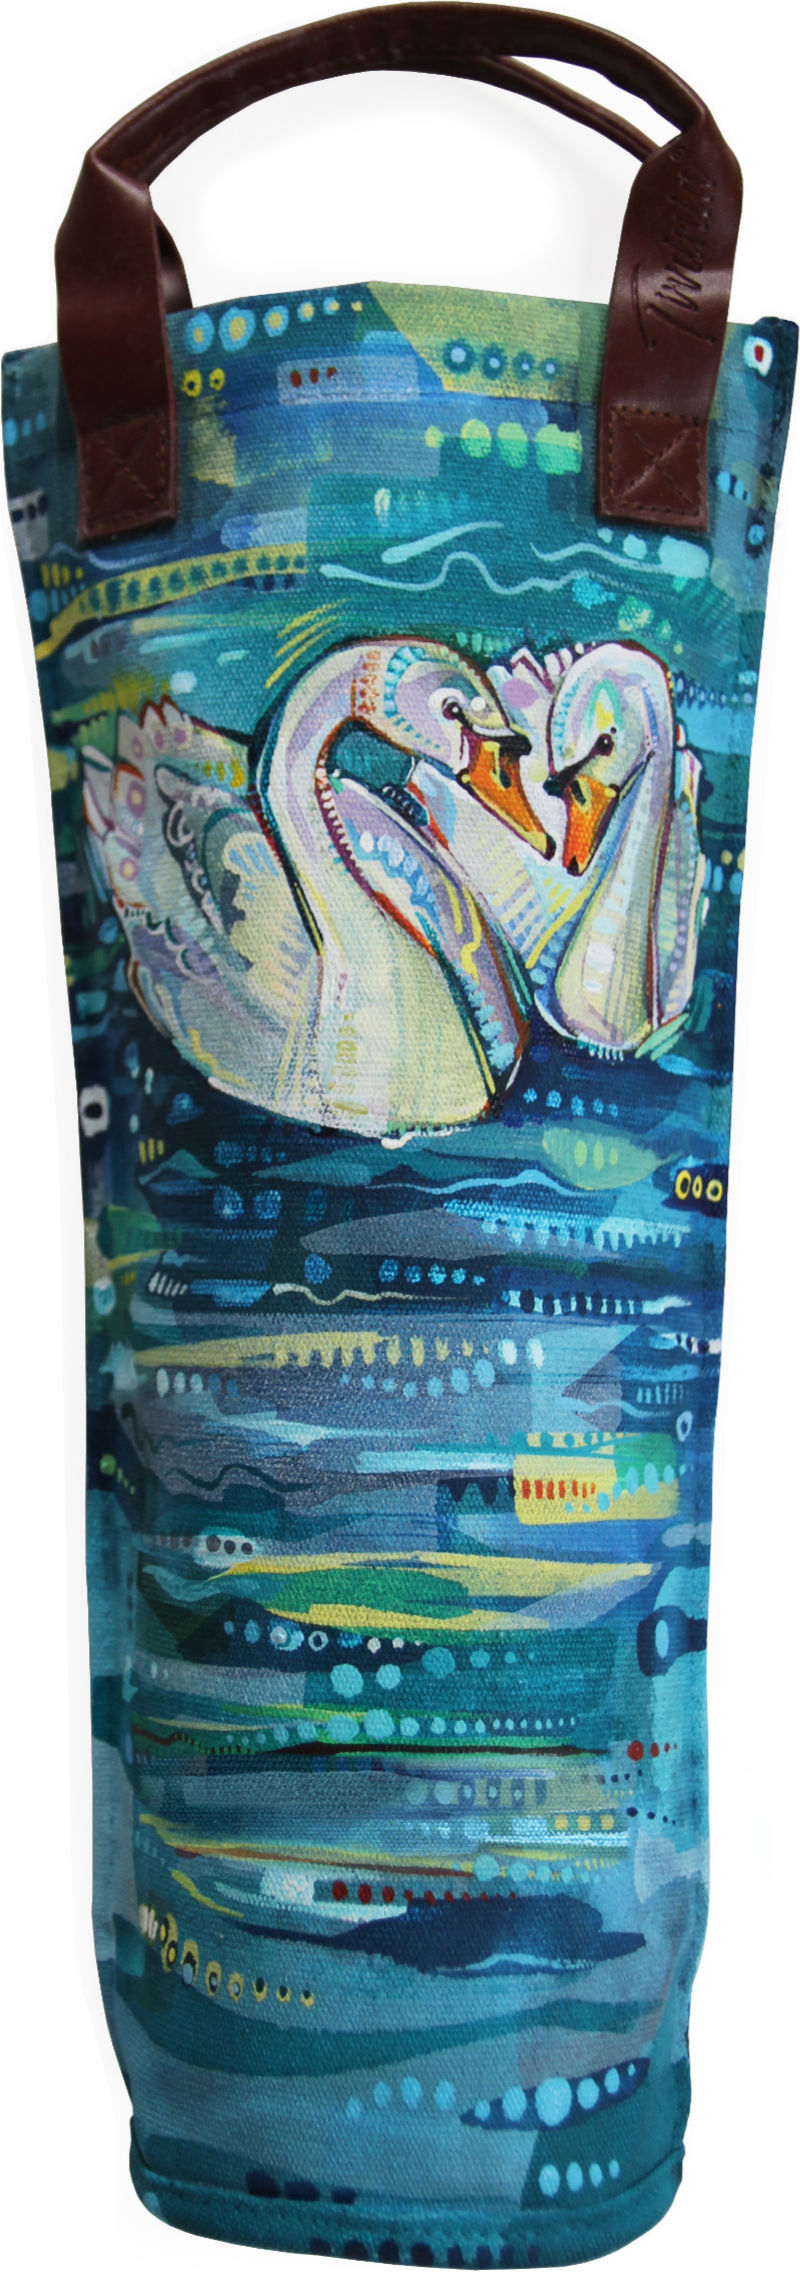 pair of white swans, sweet moment between two birds, love illustration on a wine bottle carrier